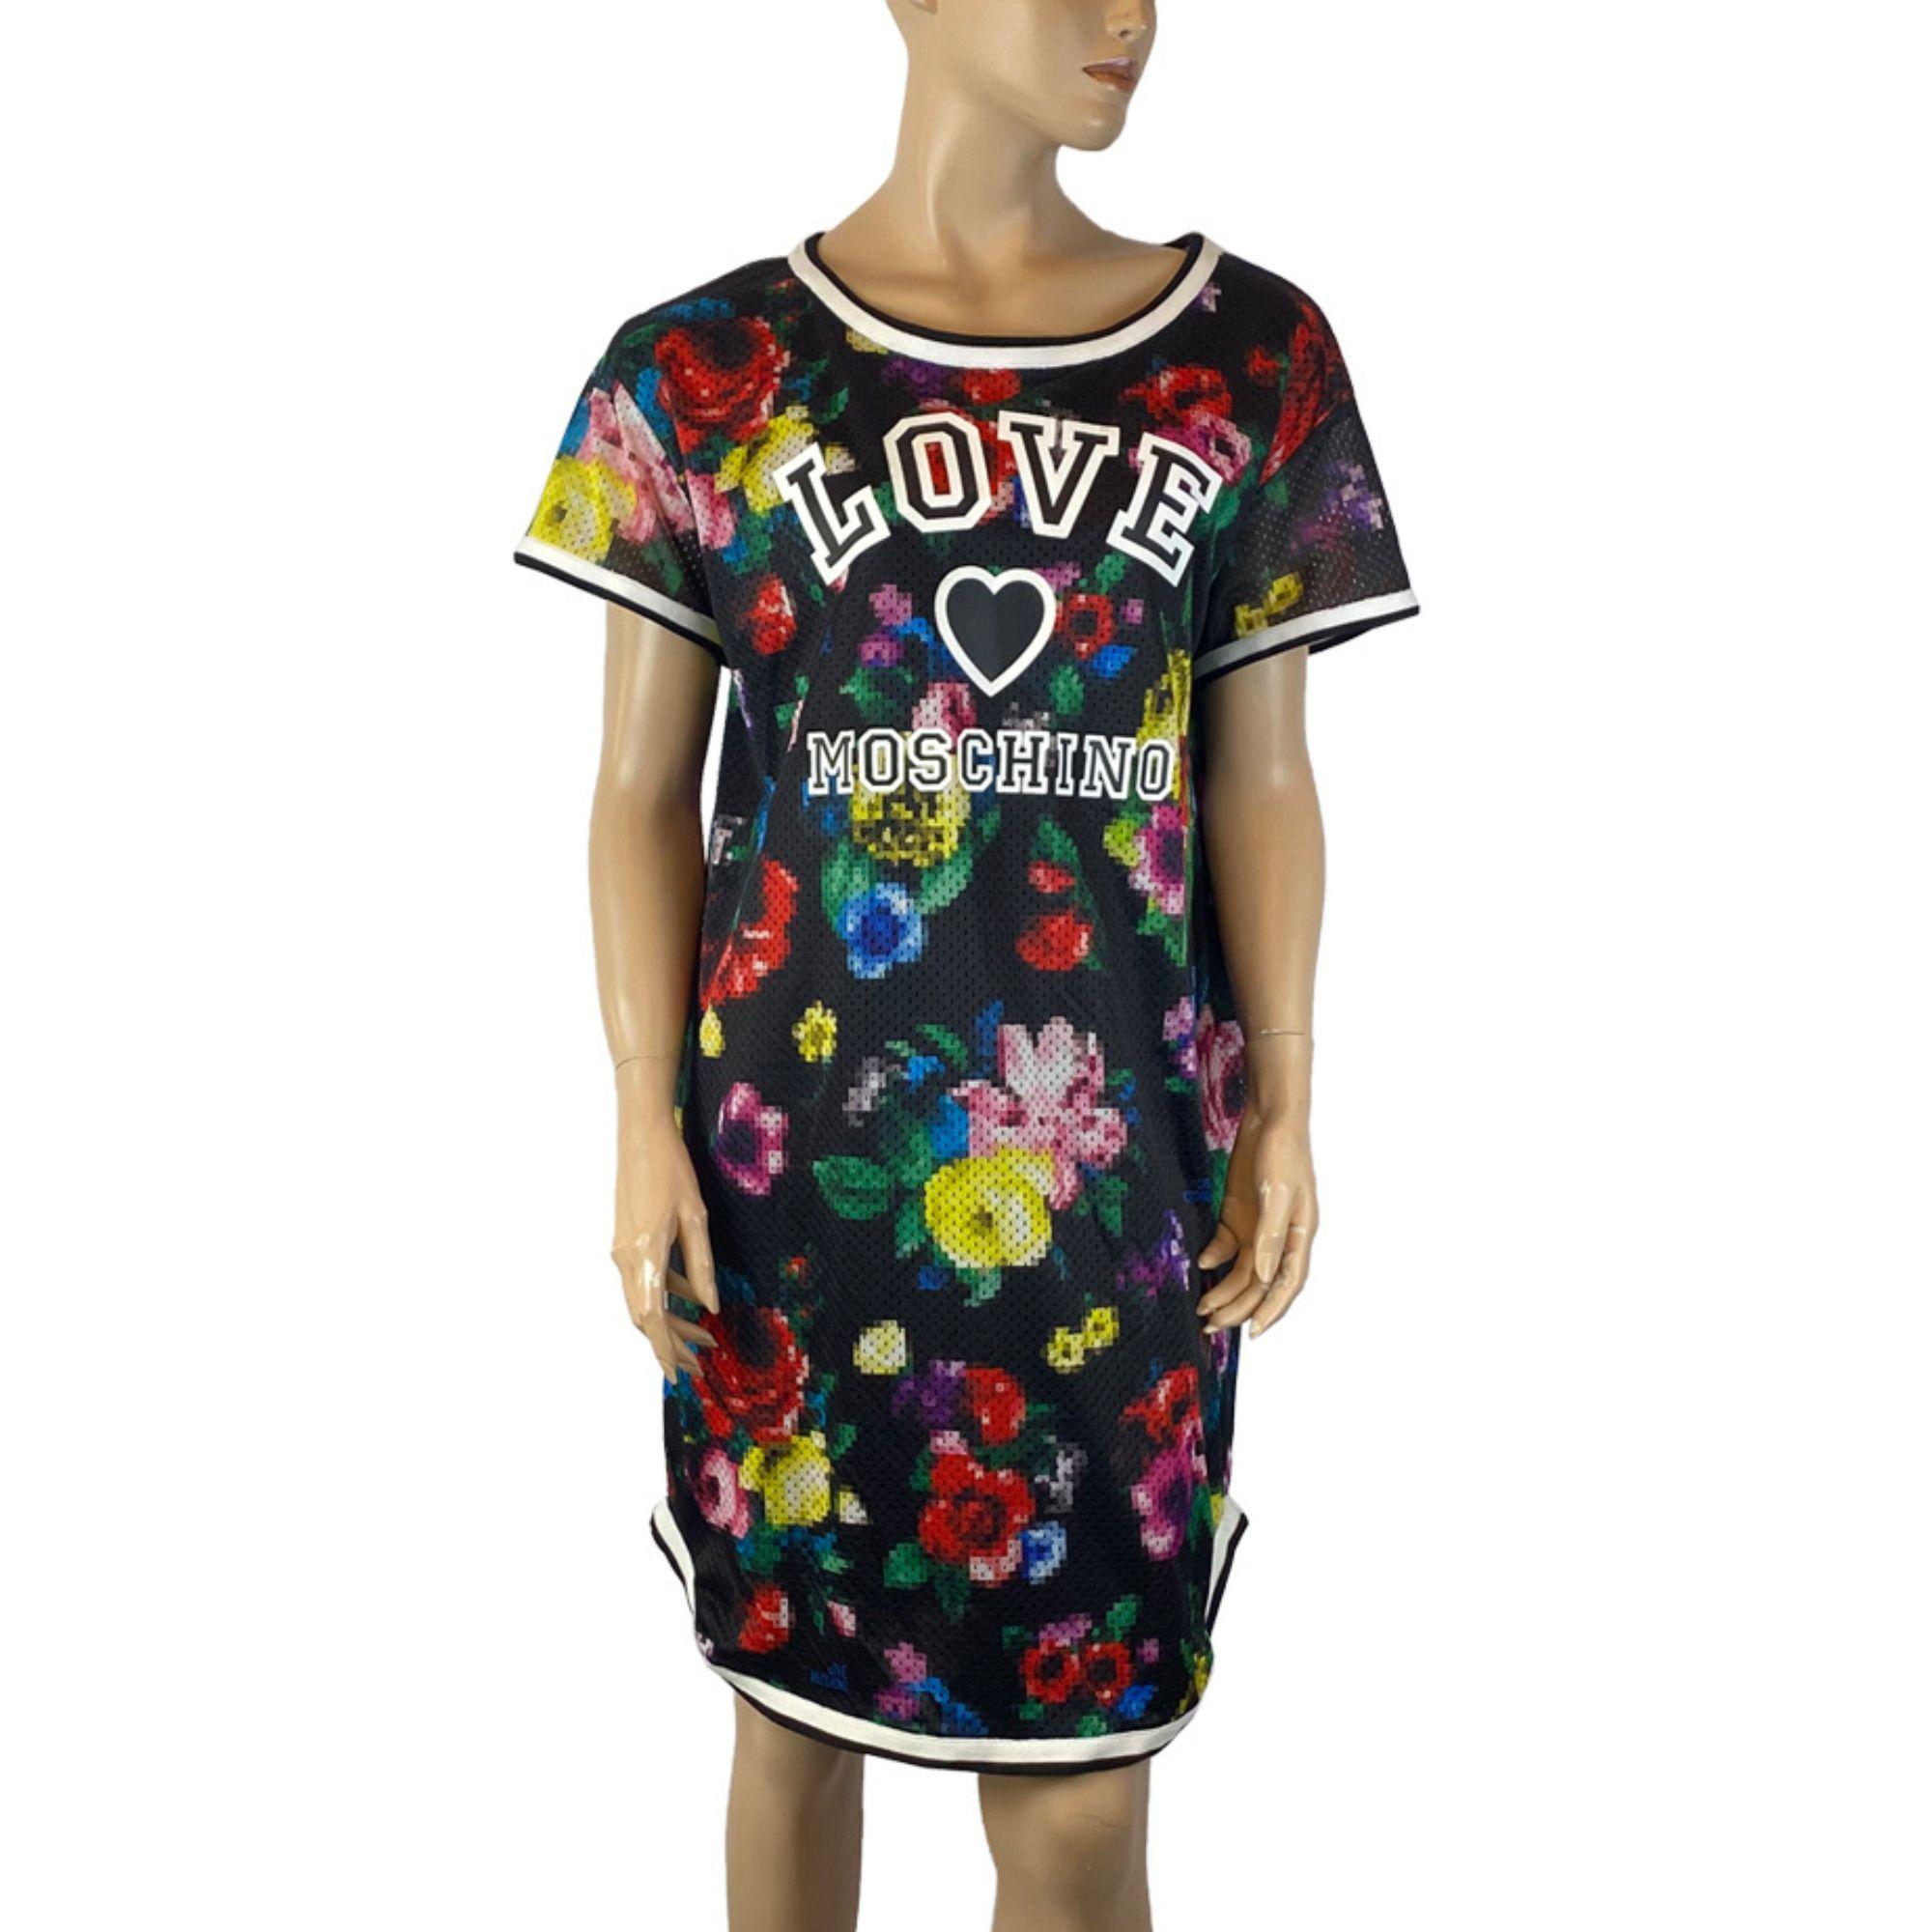 Love Moschino pixel multicolor flower printed drilled techno jersey, this short basket style lined dress features scoop neck, short sleeves, rounded hemline and striped trimming. Relaxed fitting.

Material: Polyester
Tag Size: US 6 / IT 42 / EU